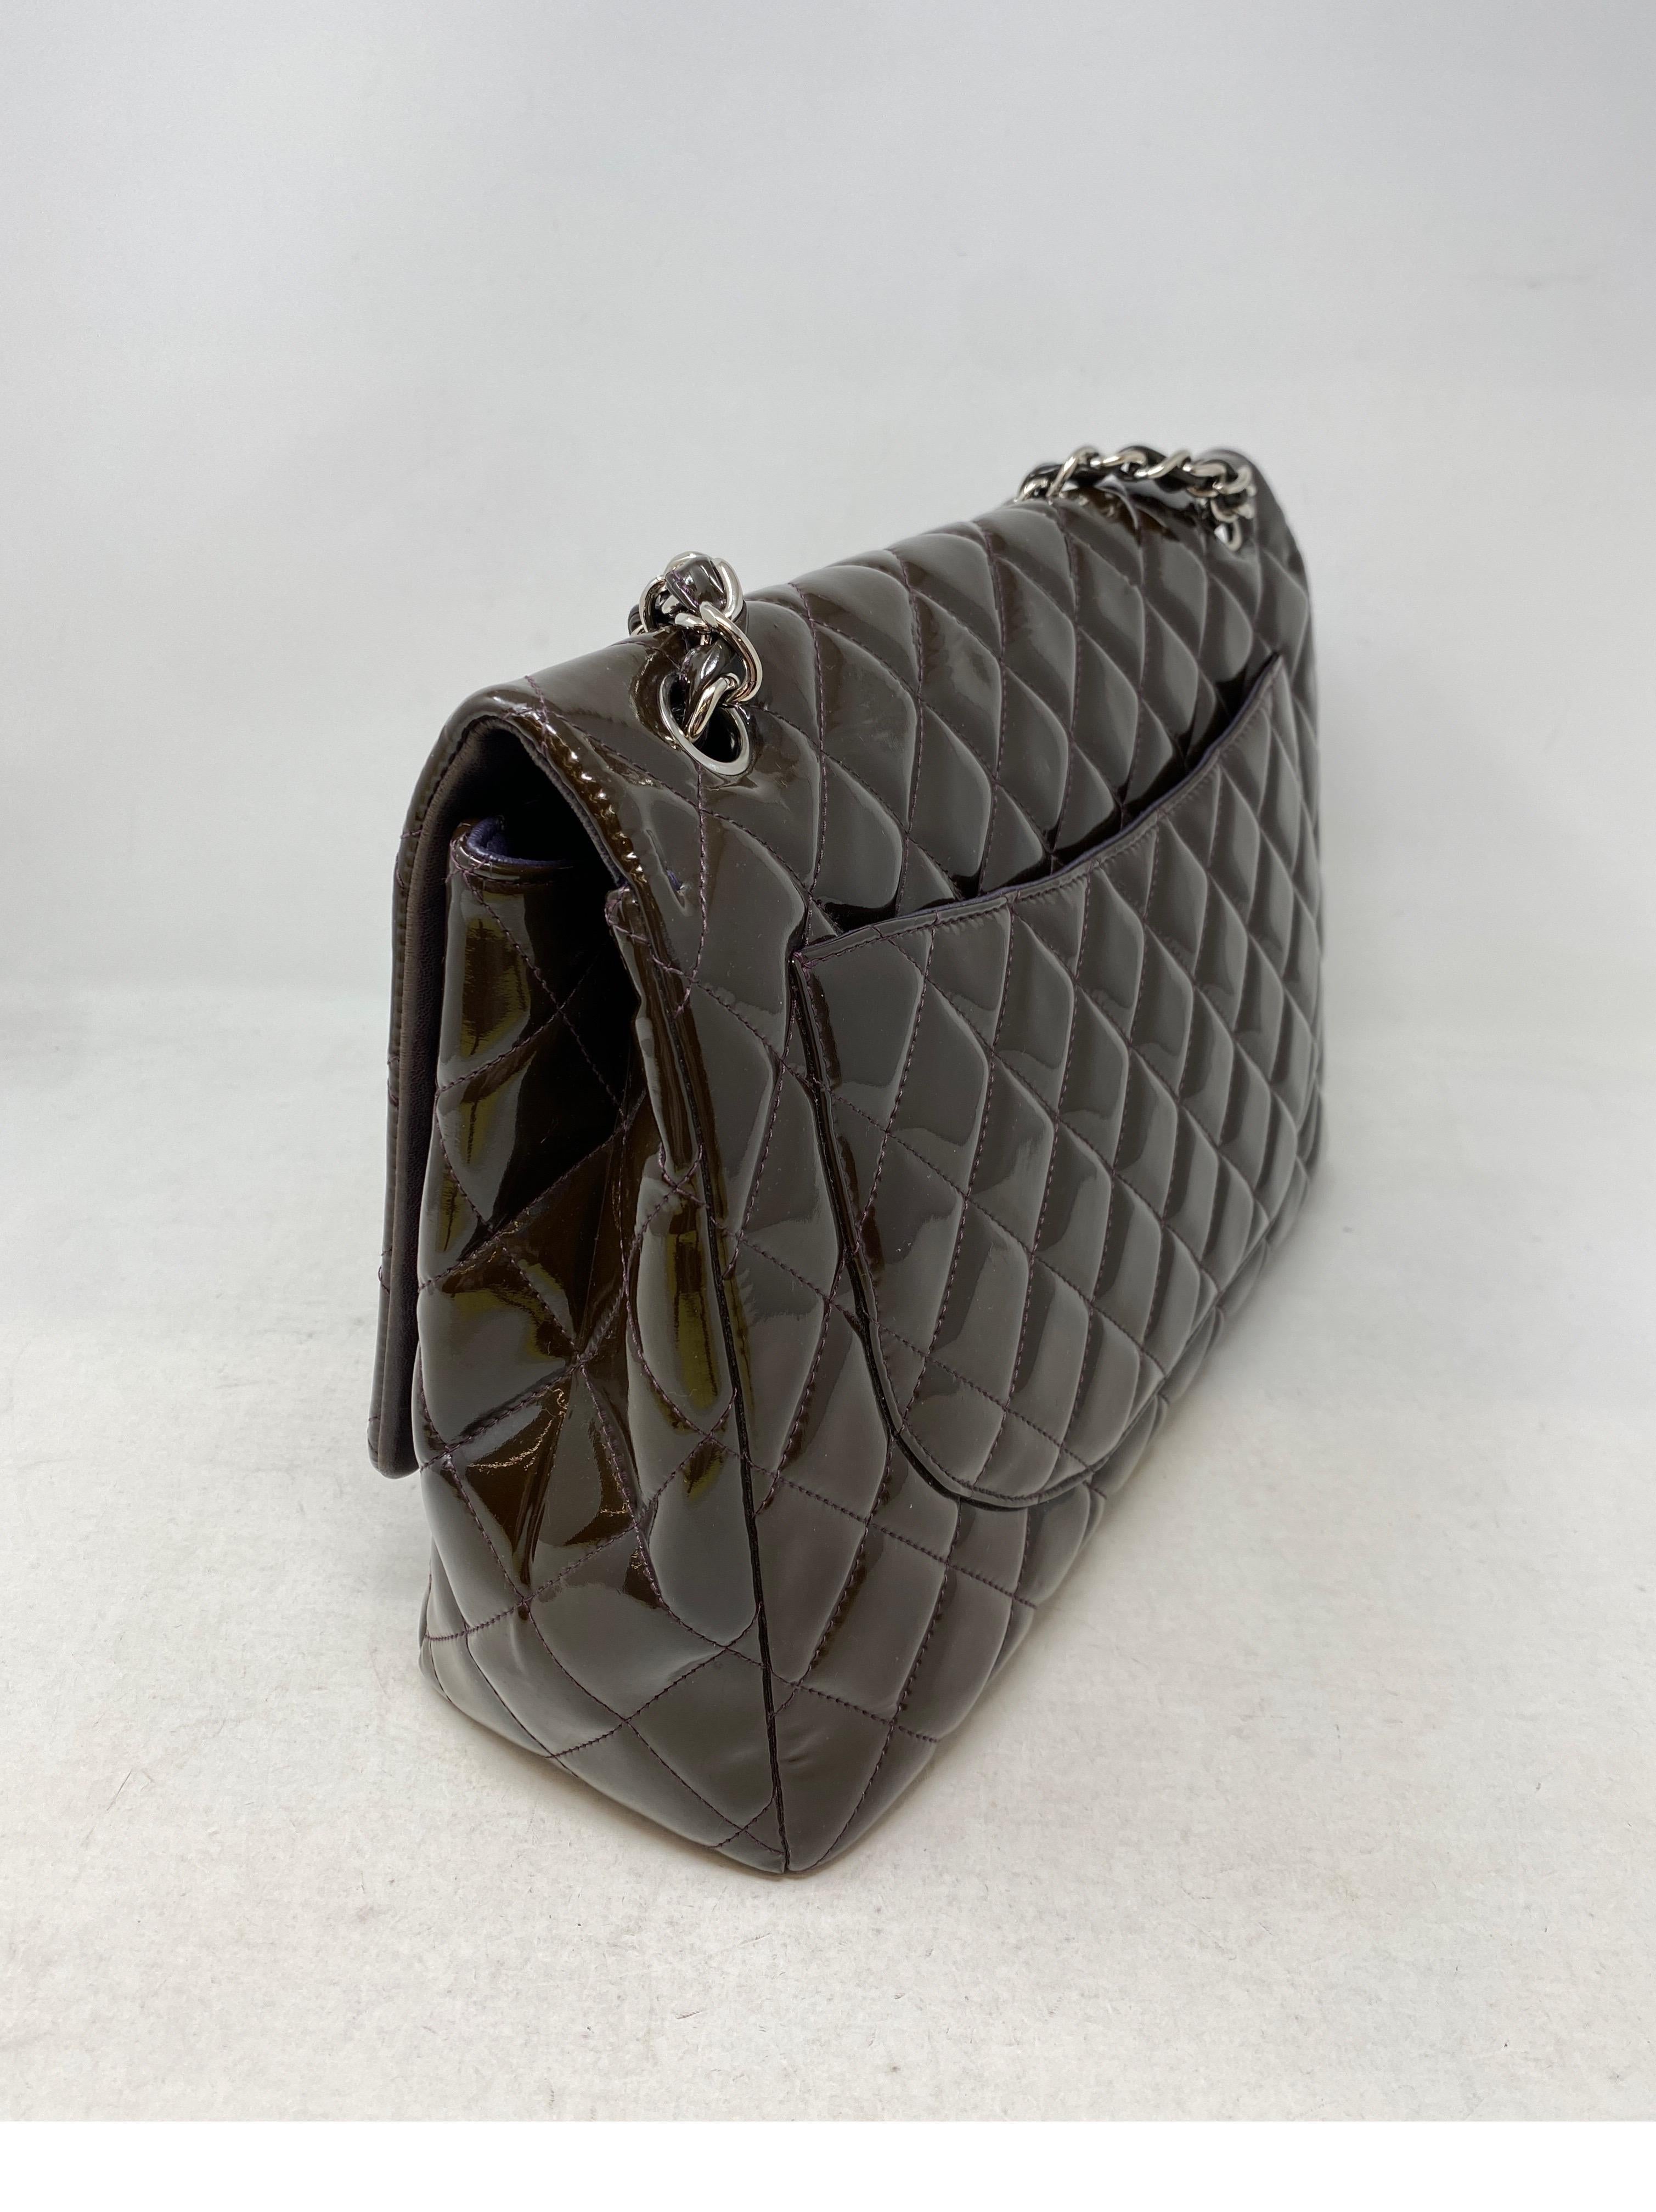 Women's or Men's Chanel Jumbo Patent Leather Brown Bag 